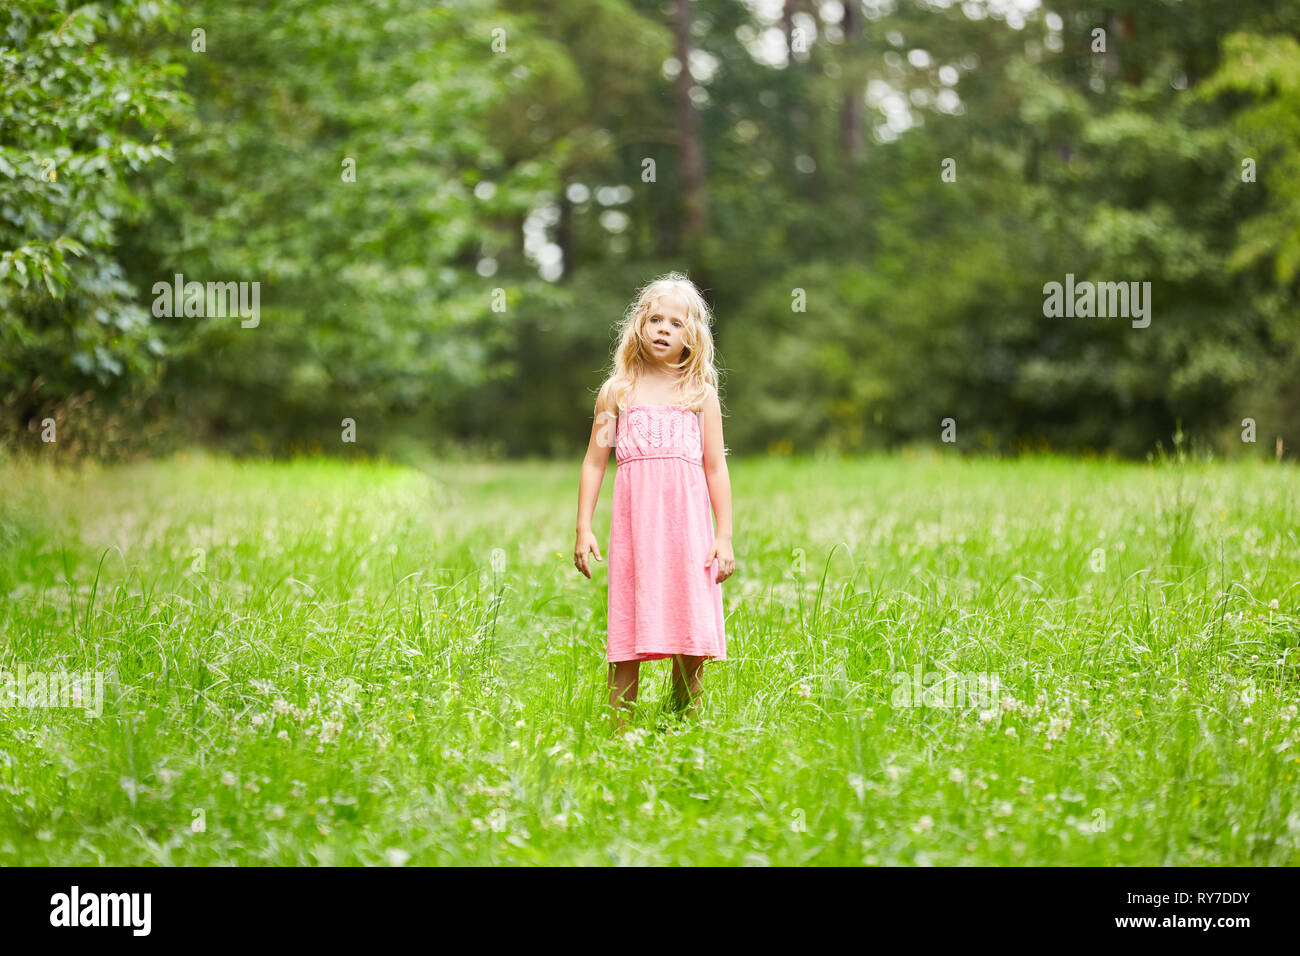 Blonde girl on a summer Meadow during the vacation in the park or in the garden Stock Photo